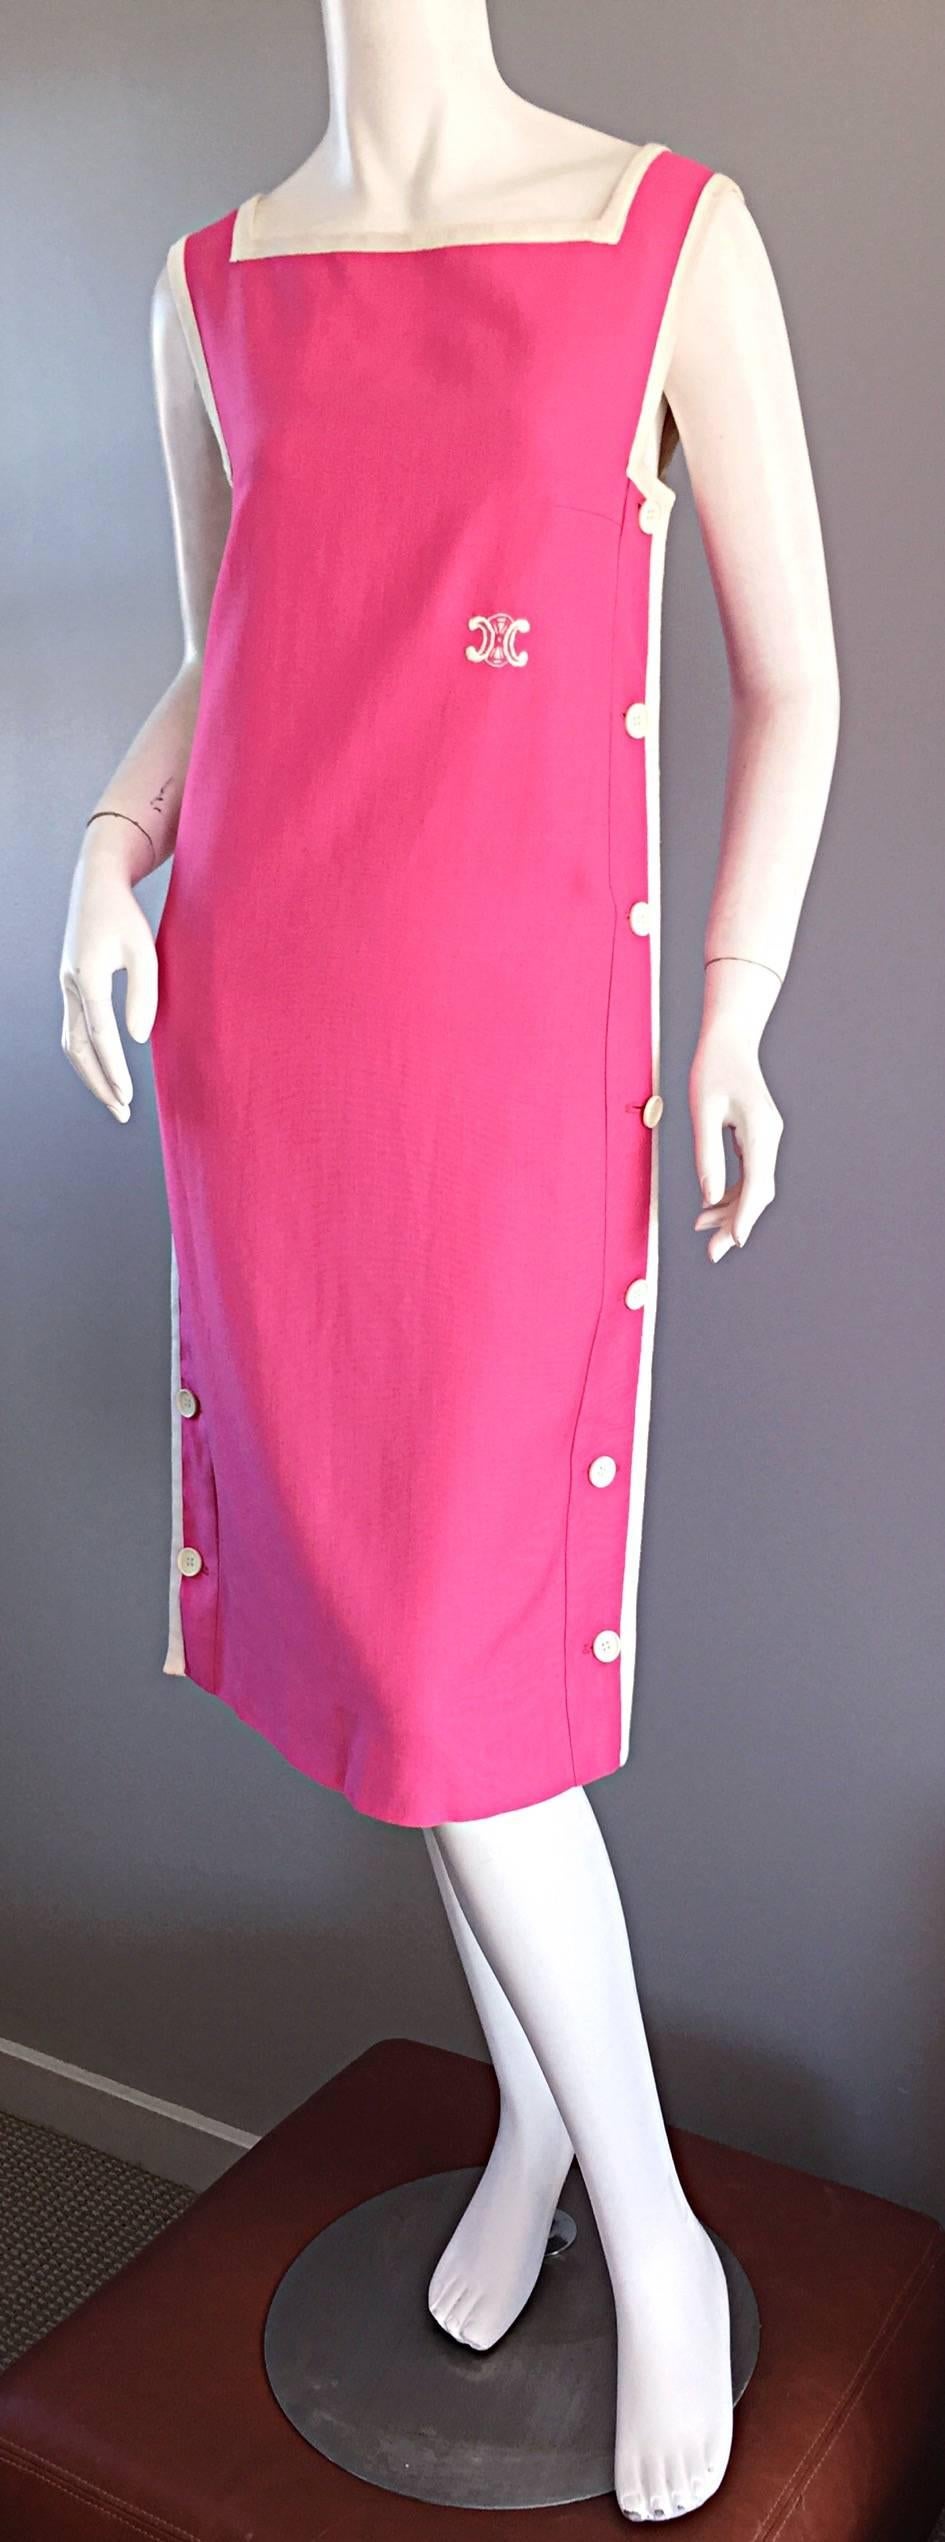 1960s Celine Bubble Gum Pink + White Vintage 60s Shift Dress In Excellent Condition For Sale In San Diego, CA